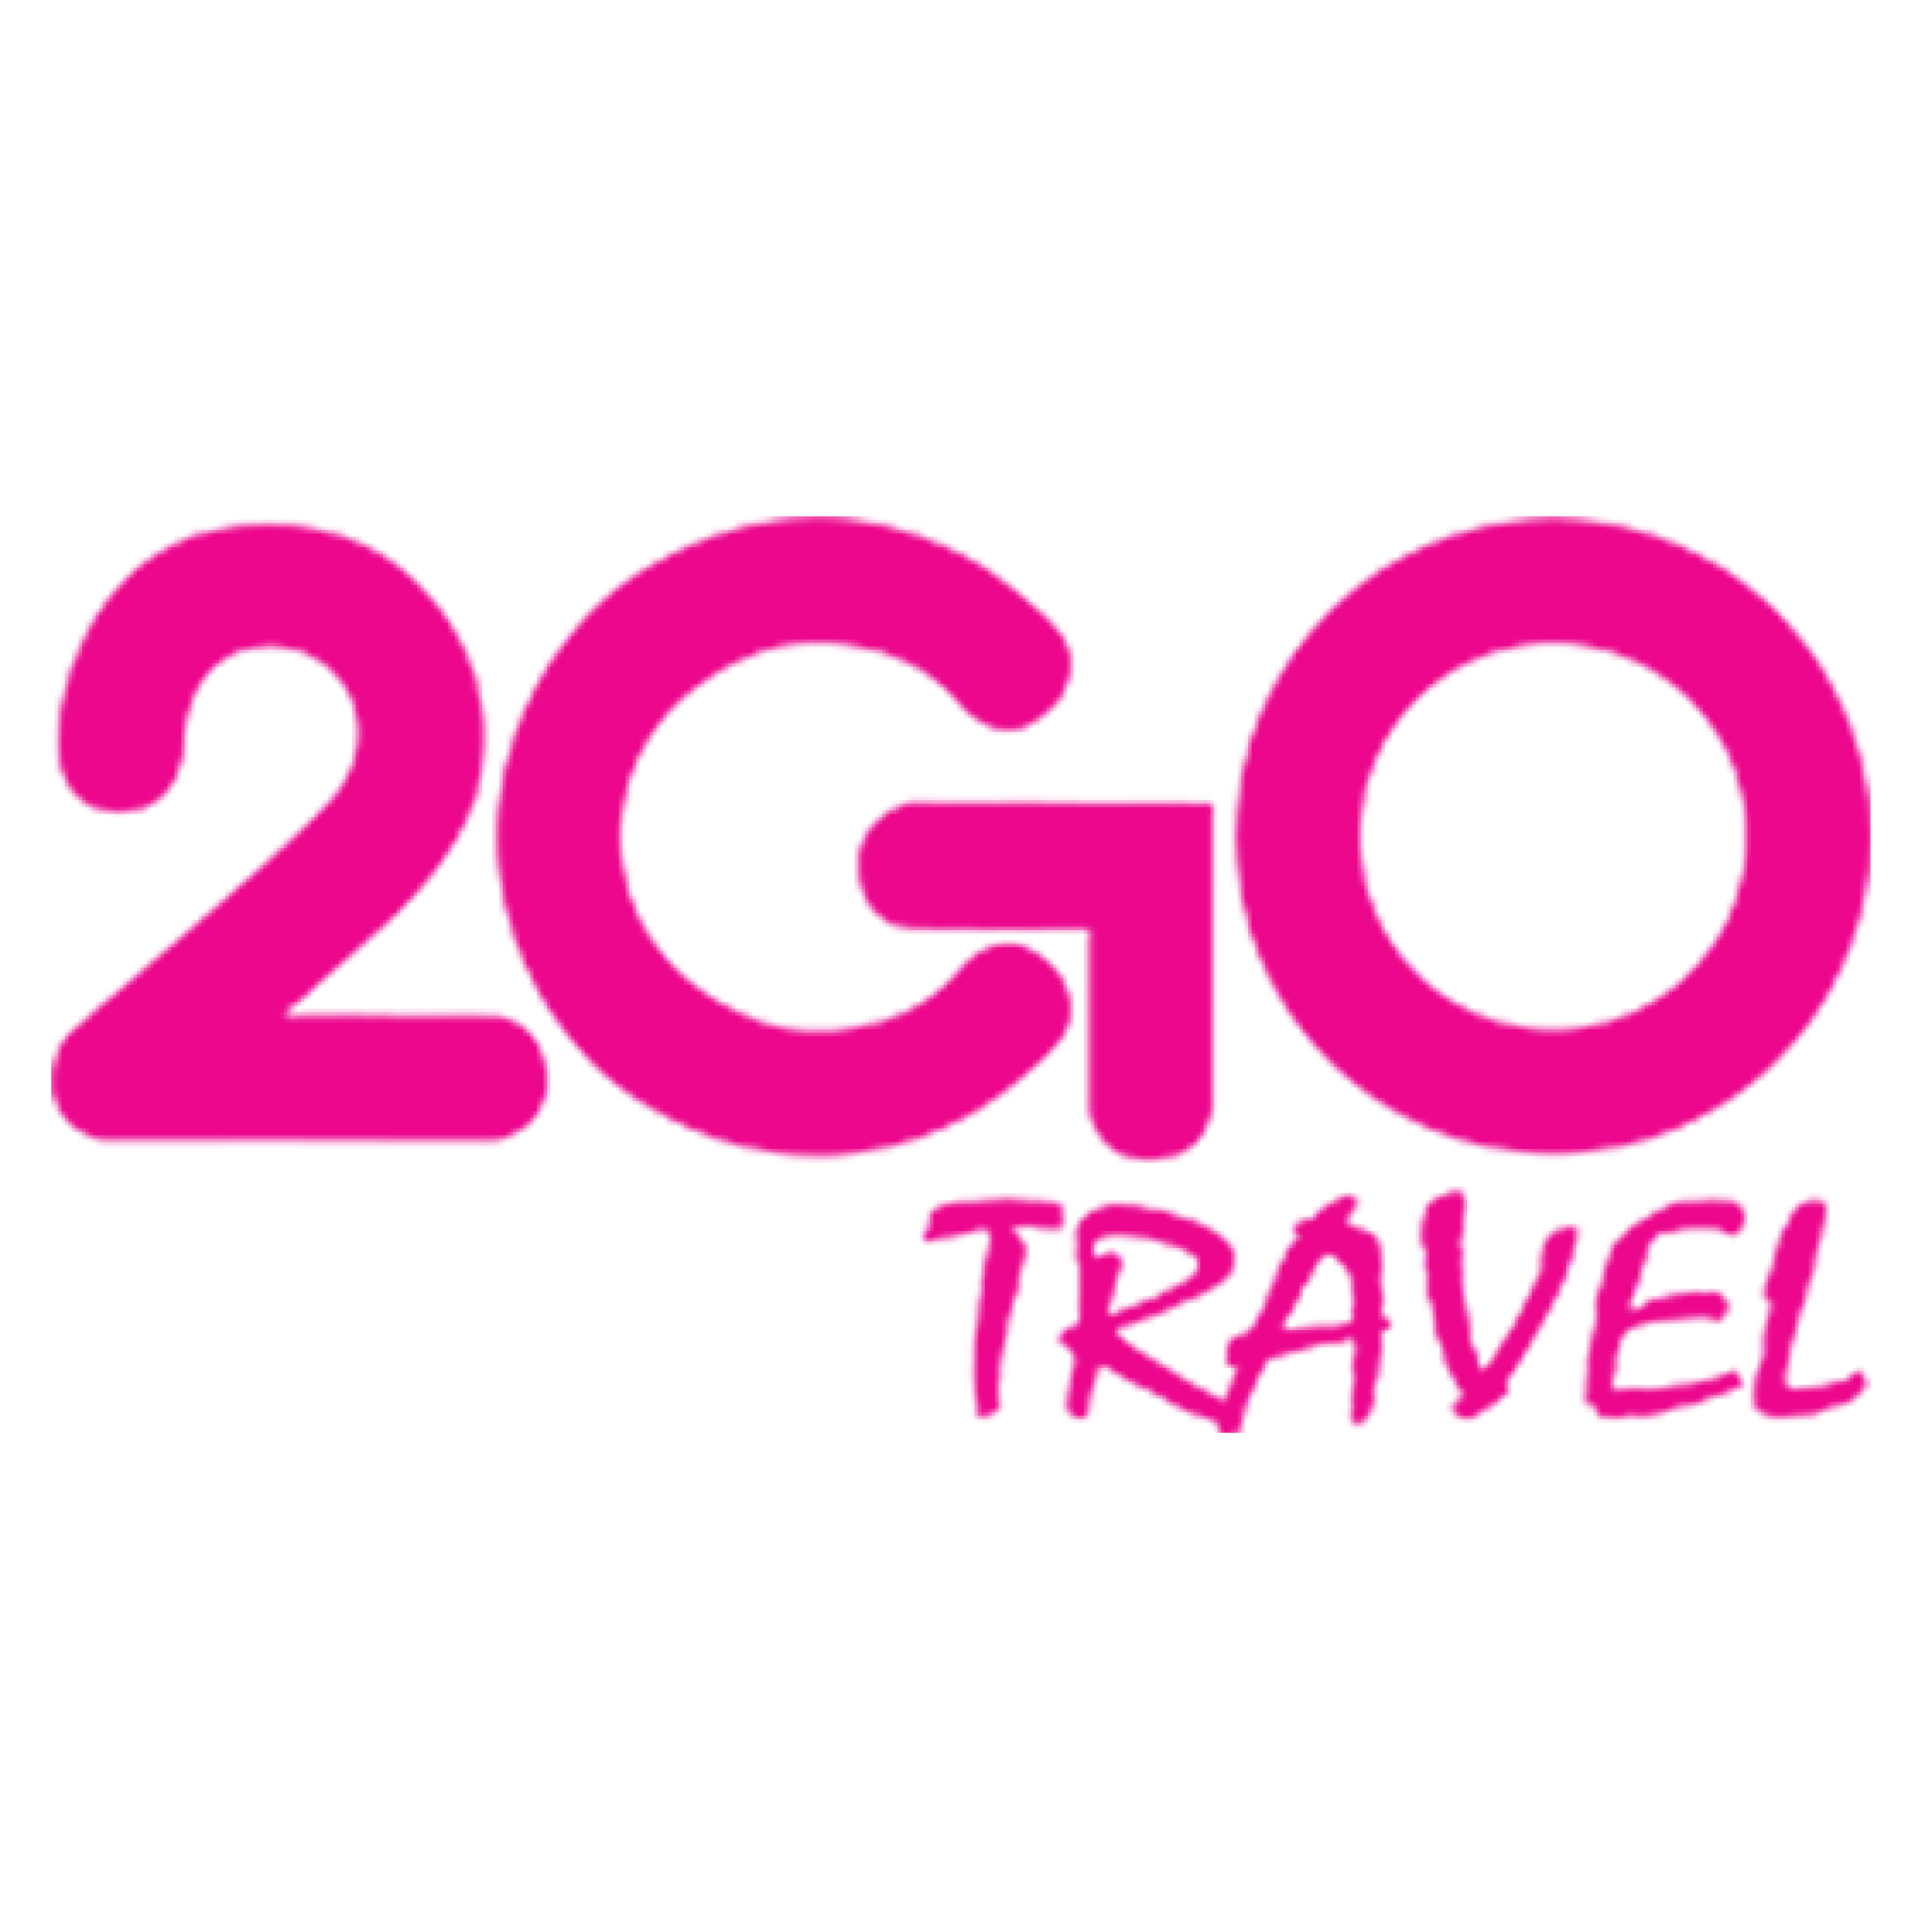 2go travel cancelled voyage